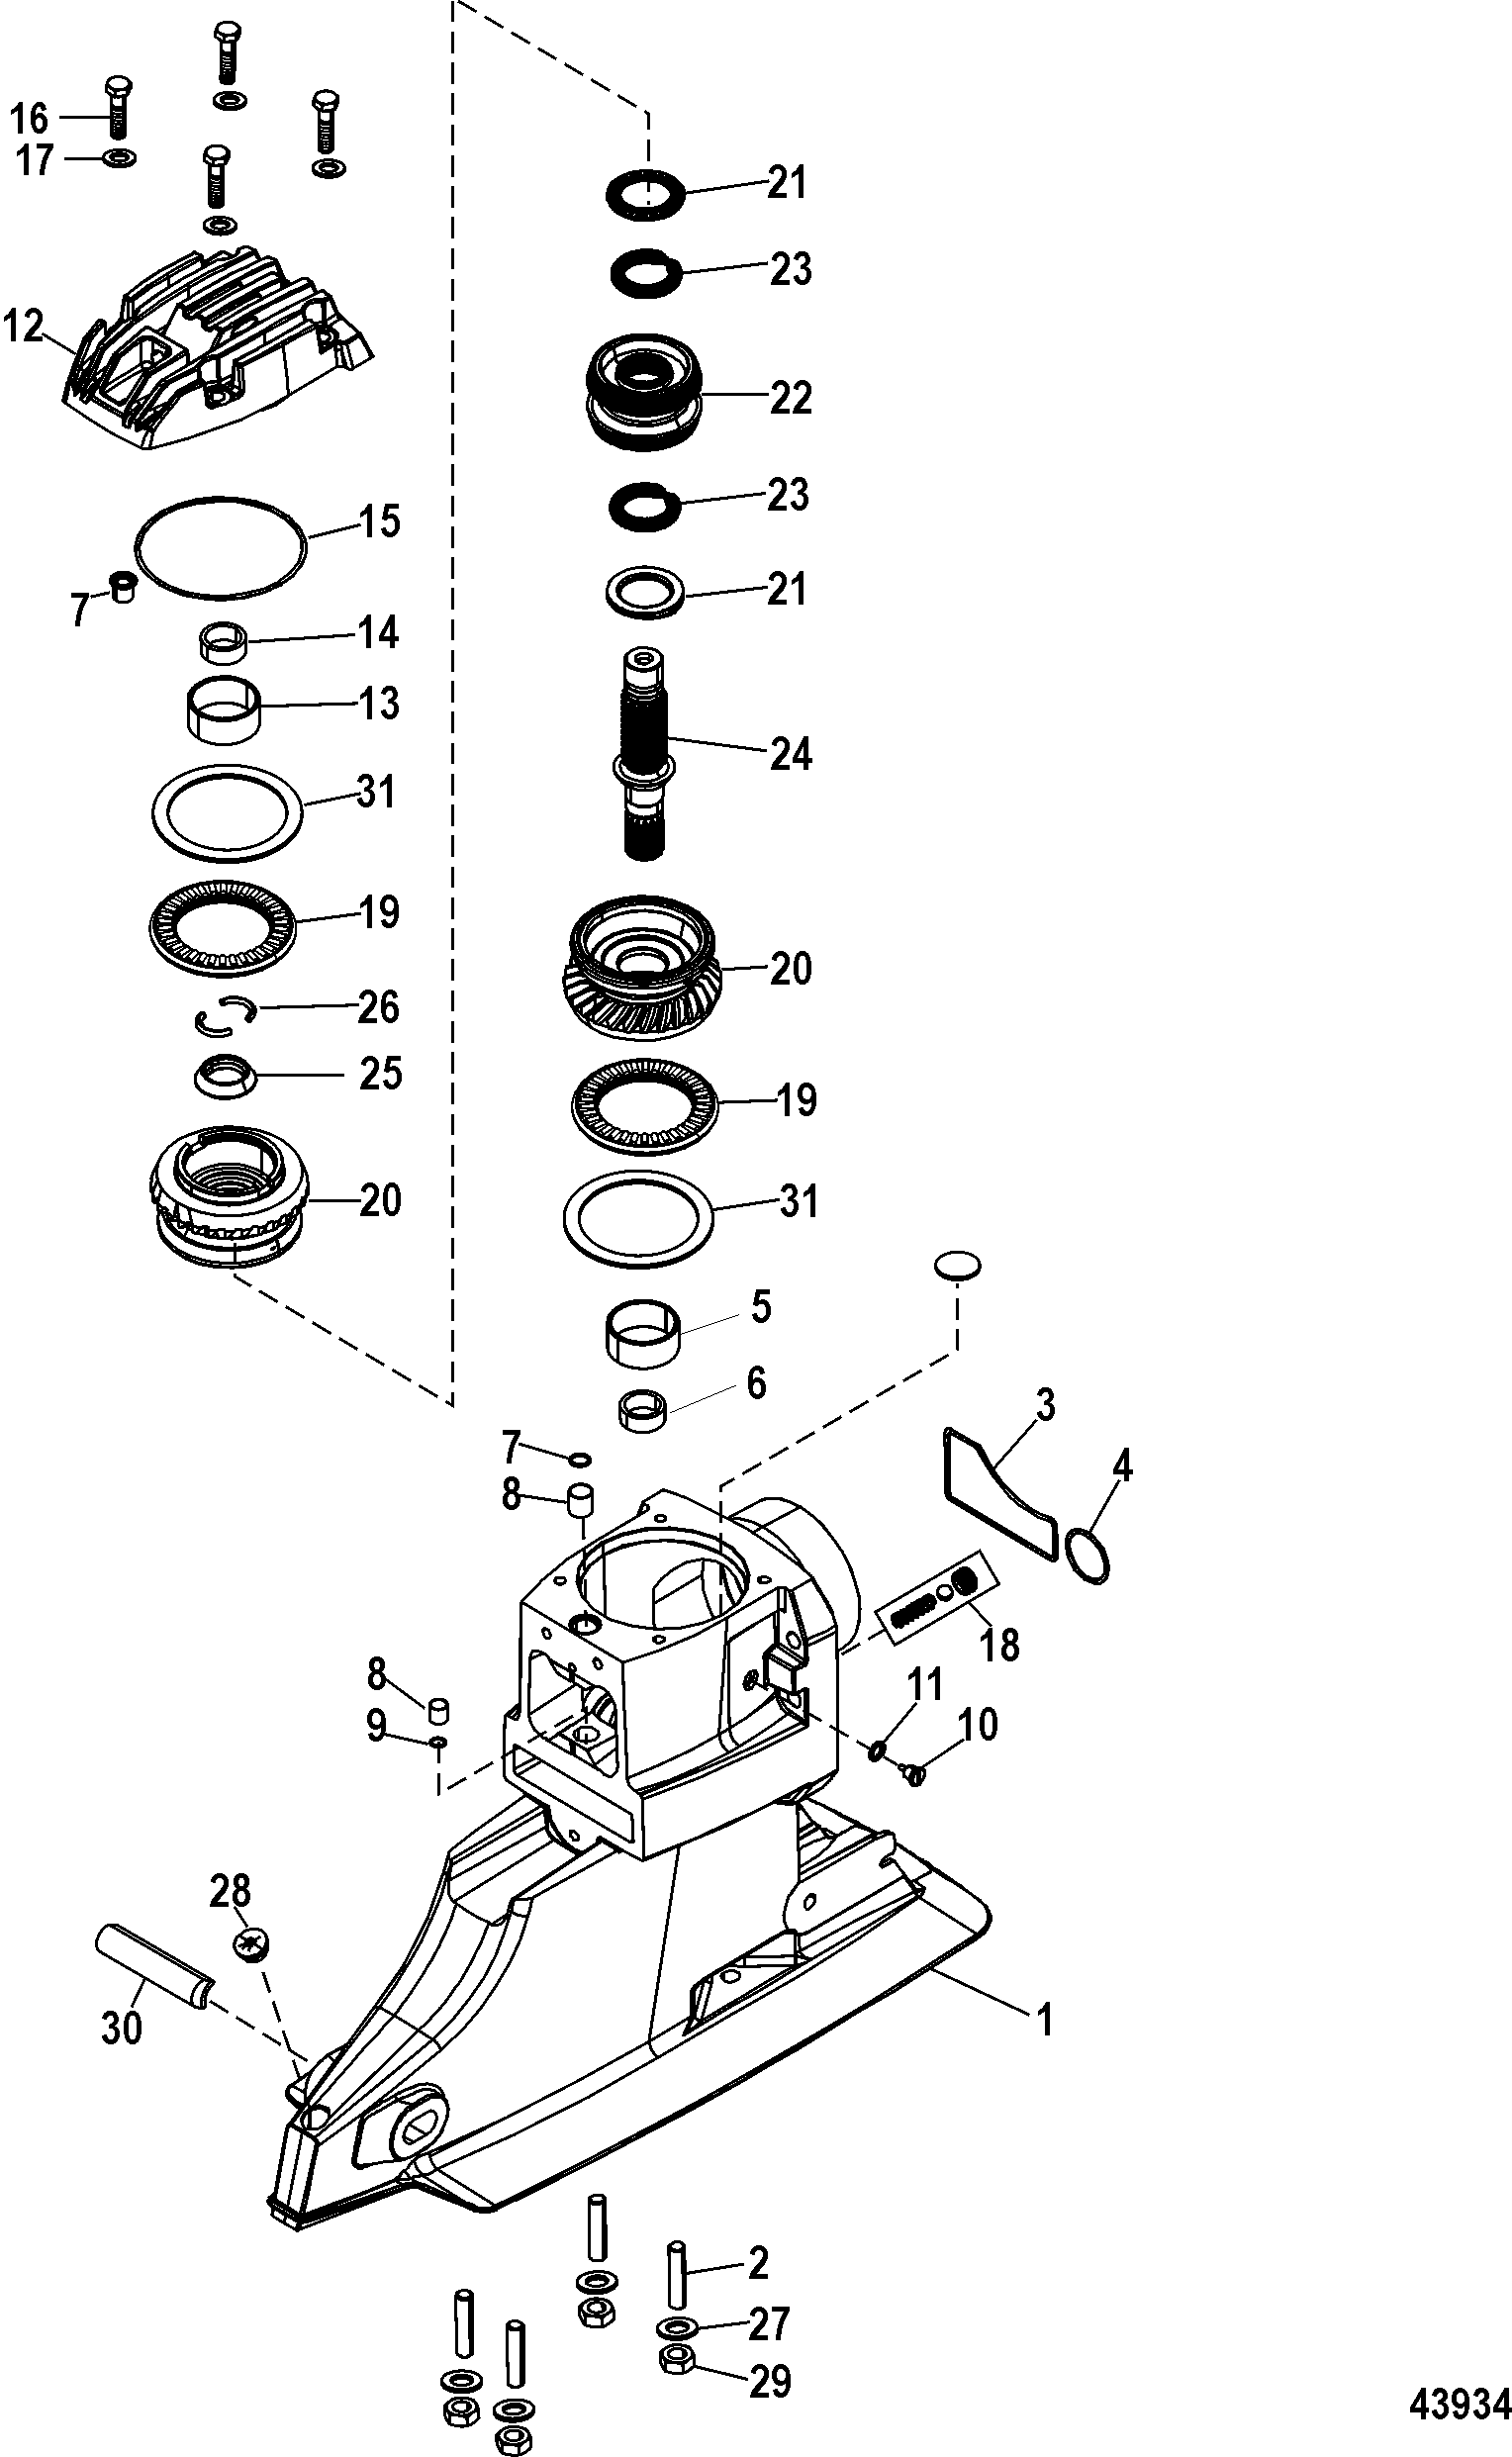 Driveshaft Housing and Drive Gears